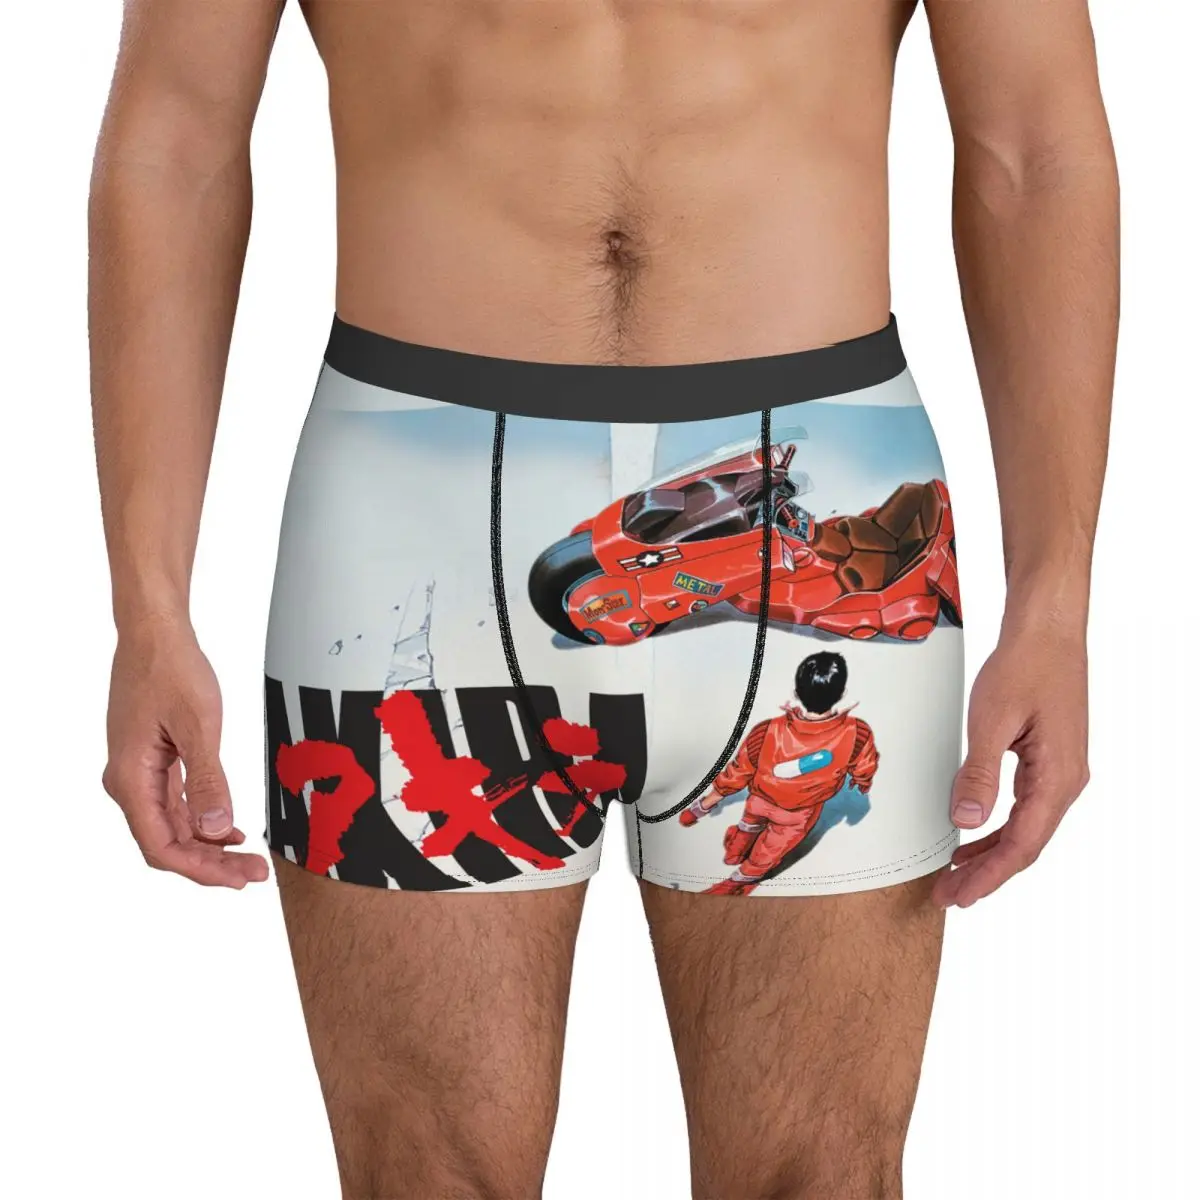 Akira Tetsuo Kanedo Underwear Ready to Ride 3D Pouch High Quality Boxershorts Print Shorts Briefs Sexy Male Underpants Big Size